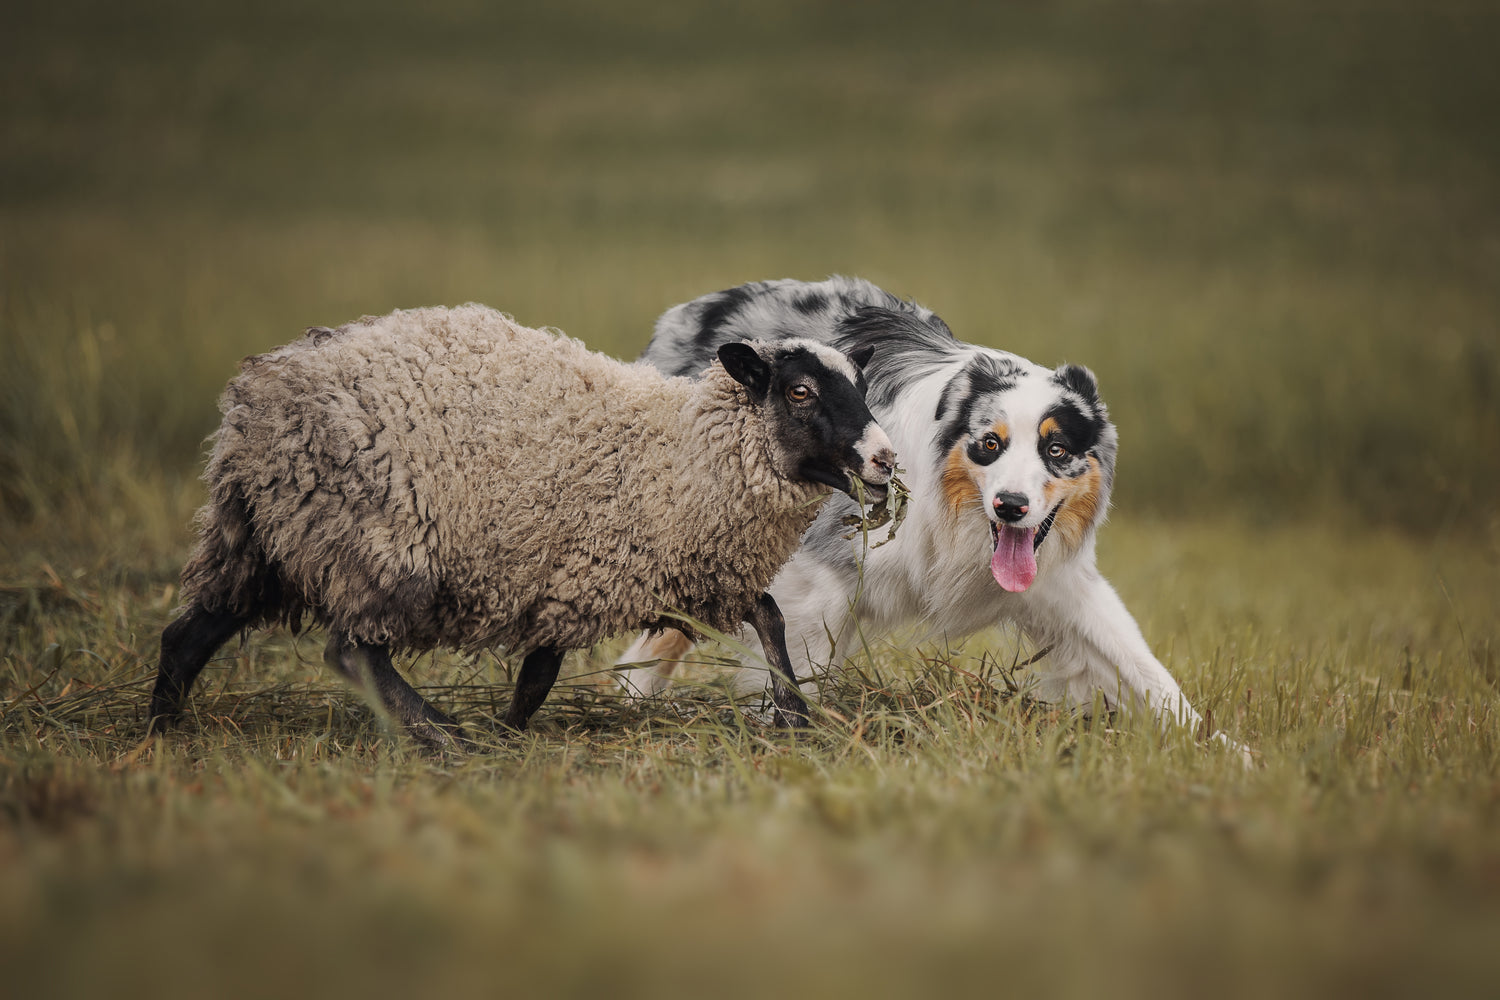 A sheep dog herds a sheep in an empty green field during the day. 